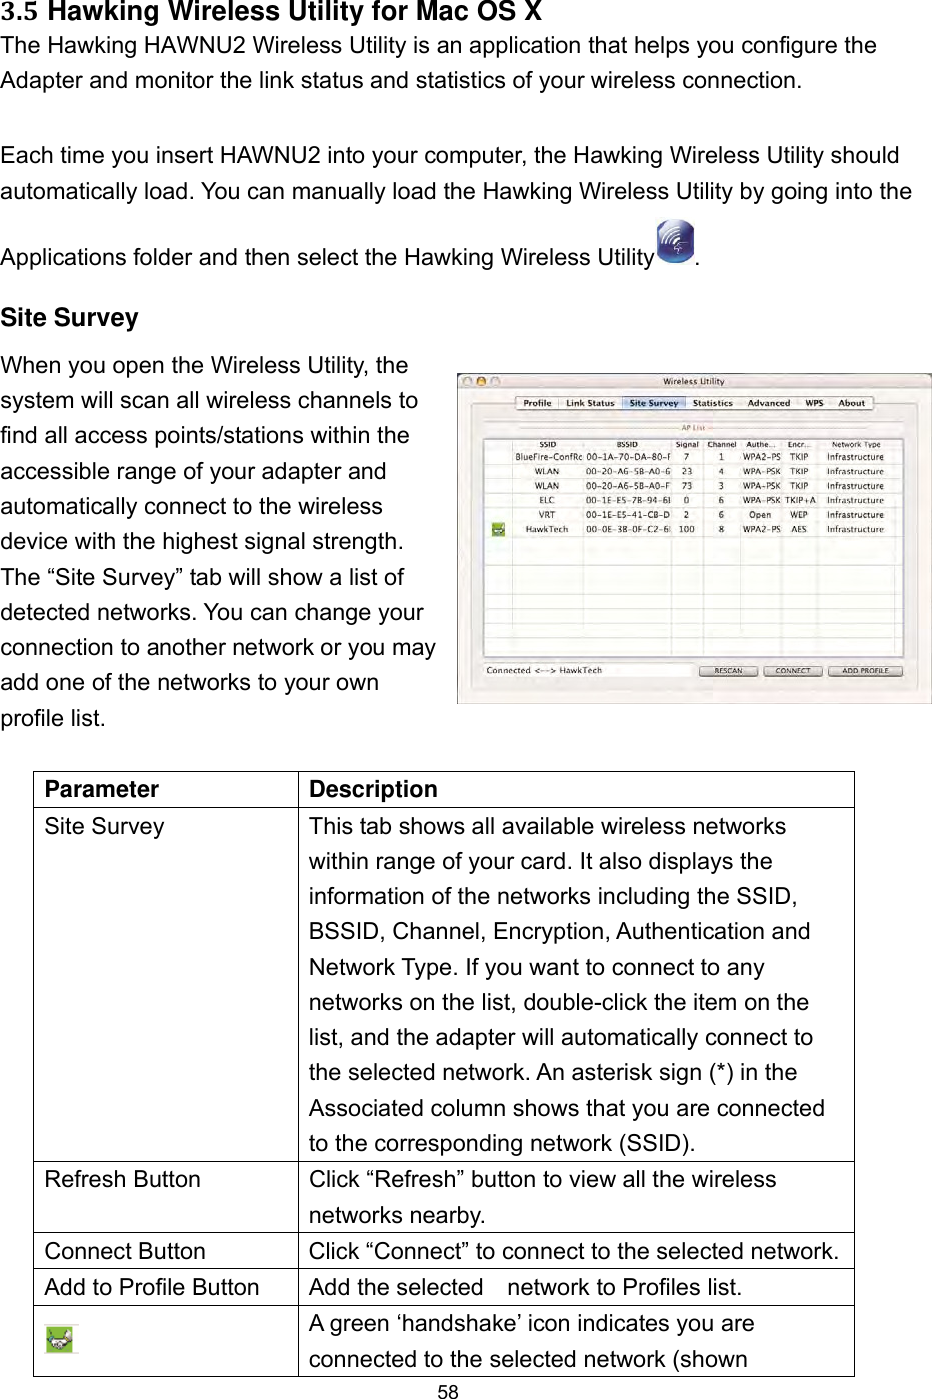  58 3.5 Hawking Wireless Utility for Mac OS X The Hawking HAWNU2 Wireless Utility is an application that helps you configure the Adapter and monitor the link status and statistics of your wireless connection.   Each time you insert HAWNU2 into your computer, the Hawking Wireless Utility should automatically load. You can manually load the Hawking Wireless Utility by going into the Applications folder and then select the Hawking Wireless Utility . Site Survey When you open the Wireless Utility, the system will scan all wireless channels to find all access points/stations within the accessible range of your adapter and automatically connect to the wireless device with the highest signal strength. The “Site Survey” tab will show a list of detected networks. You can change your connection to another network or you may add one of the networks to your own profile list.  Parameter Description Site Survey  This tab shows all available wireless networks within range of your card. It also displays the information of the networks including the SSID, BSSID, Channel, Encryption, Authentication and Network Type. If you want to connect to any networks on the list, double-click the item on the list, and the adapter will automatically connect to the selected network. An asterisk sign (*) in the Associated column shows that you are connected to the corresponding network (SSID). Refresh Button  Click “Refresh” button to view all the wireless networks nearby. Connect Button  Click “Connect” to connect to the selected network. Add to Profile Button  Add the selected    network to Profiles list.  A green ‘handshake’ icon indicates you are connected to the selected network (shown 